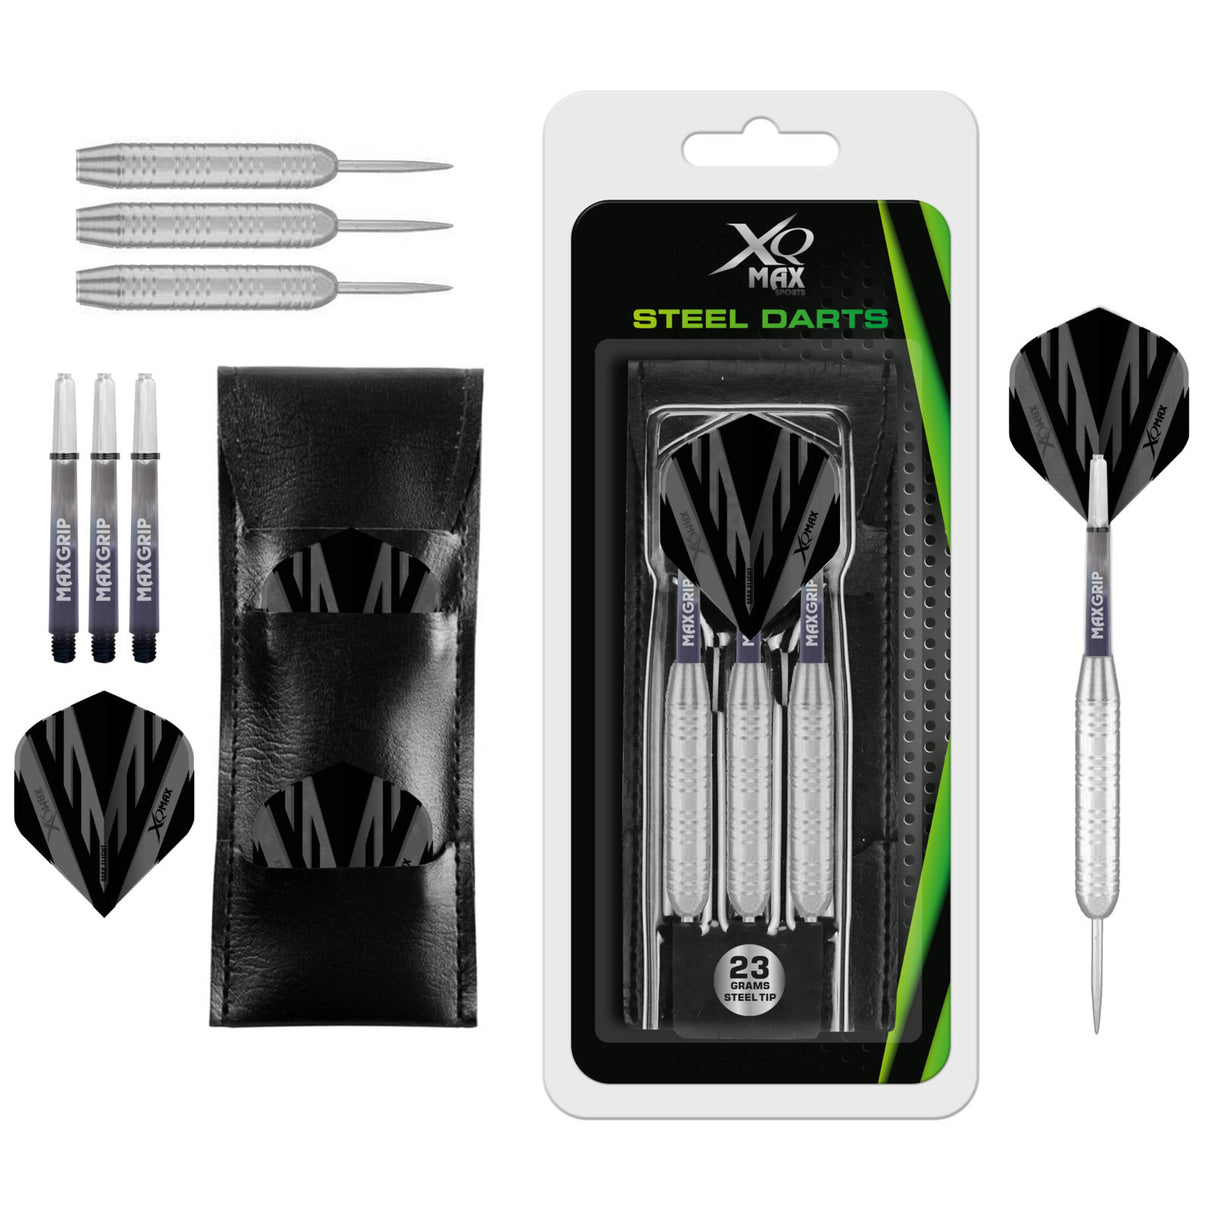 XQMax Steel Tip Darts - Silver Coated Steel - includes Case - 23g